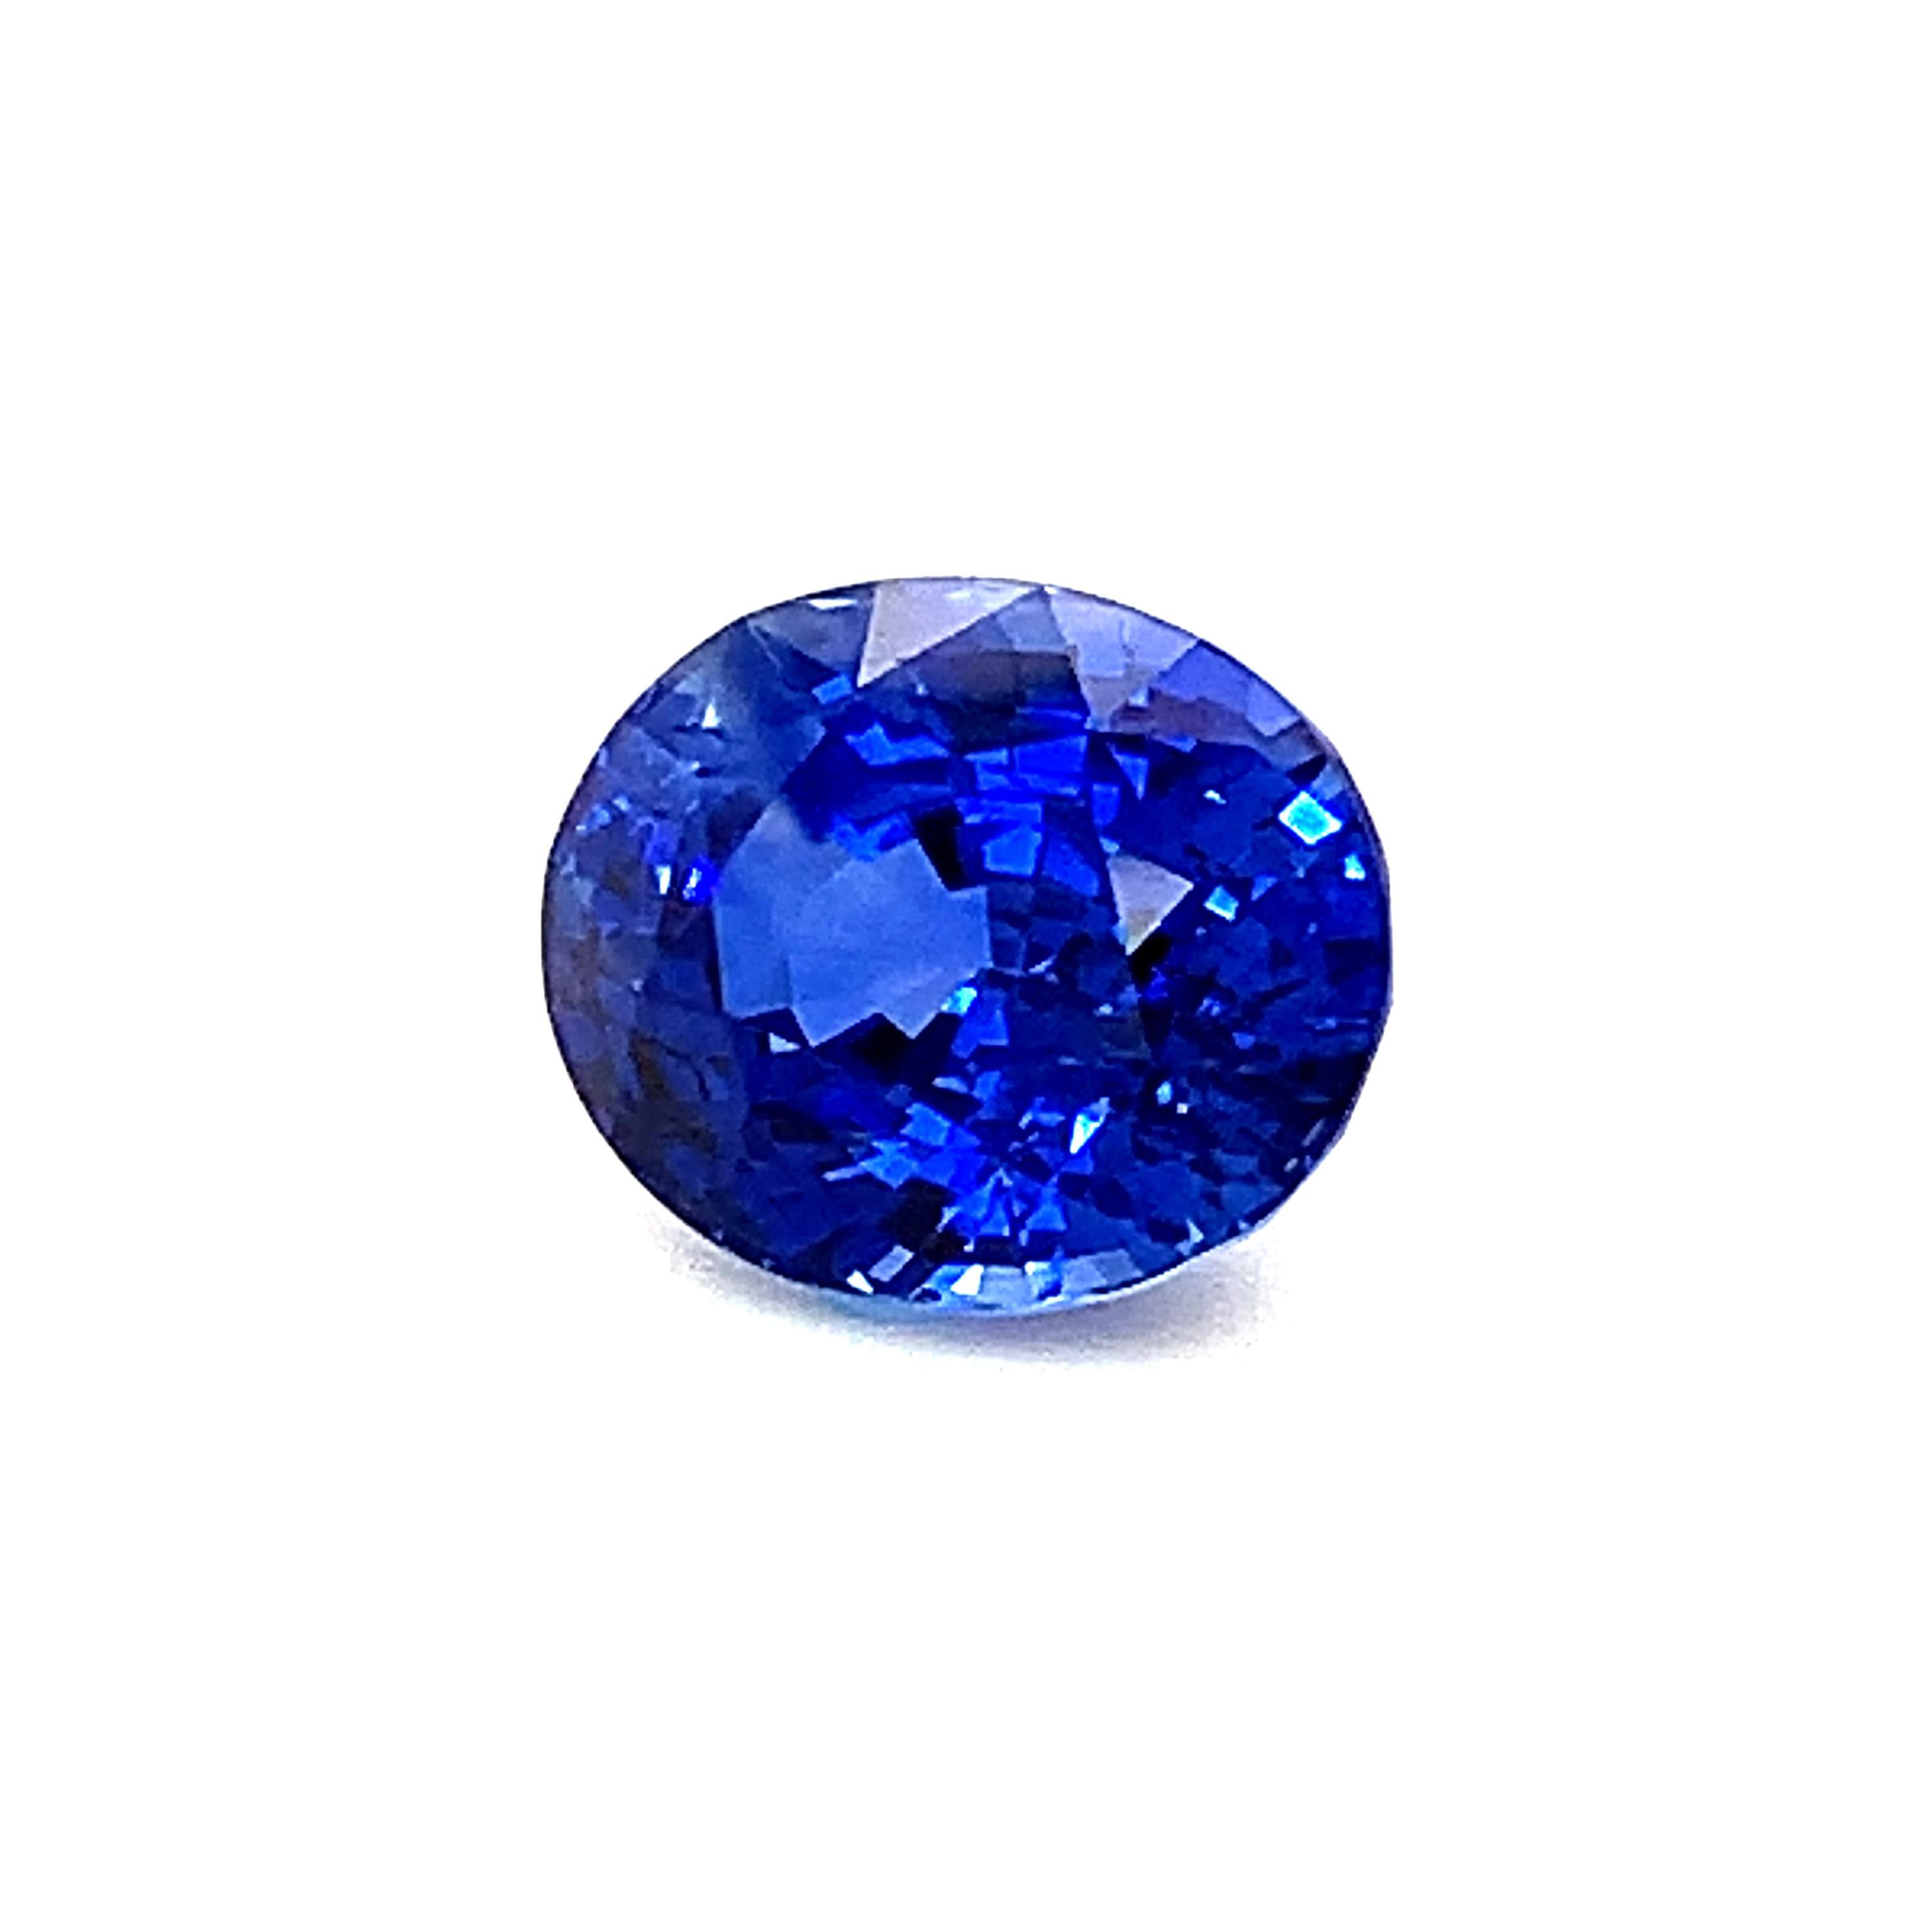 6.52 Carat Blue Sapphire Oval, Unset Loose Gemstone, GIA Certified  2